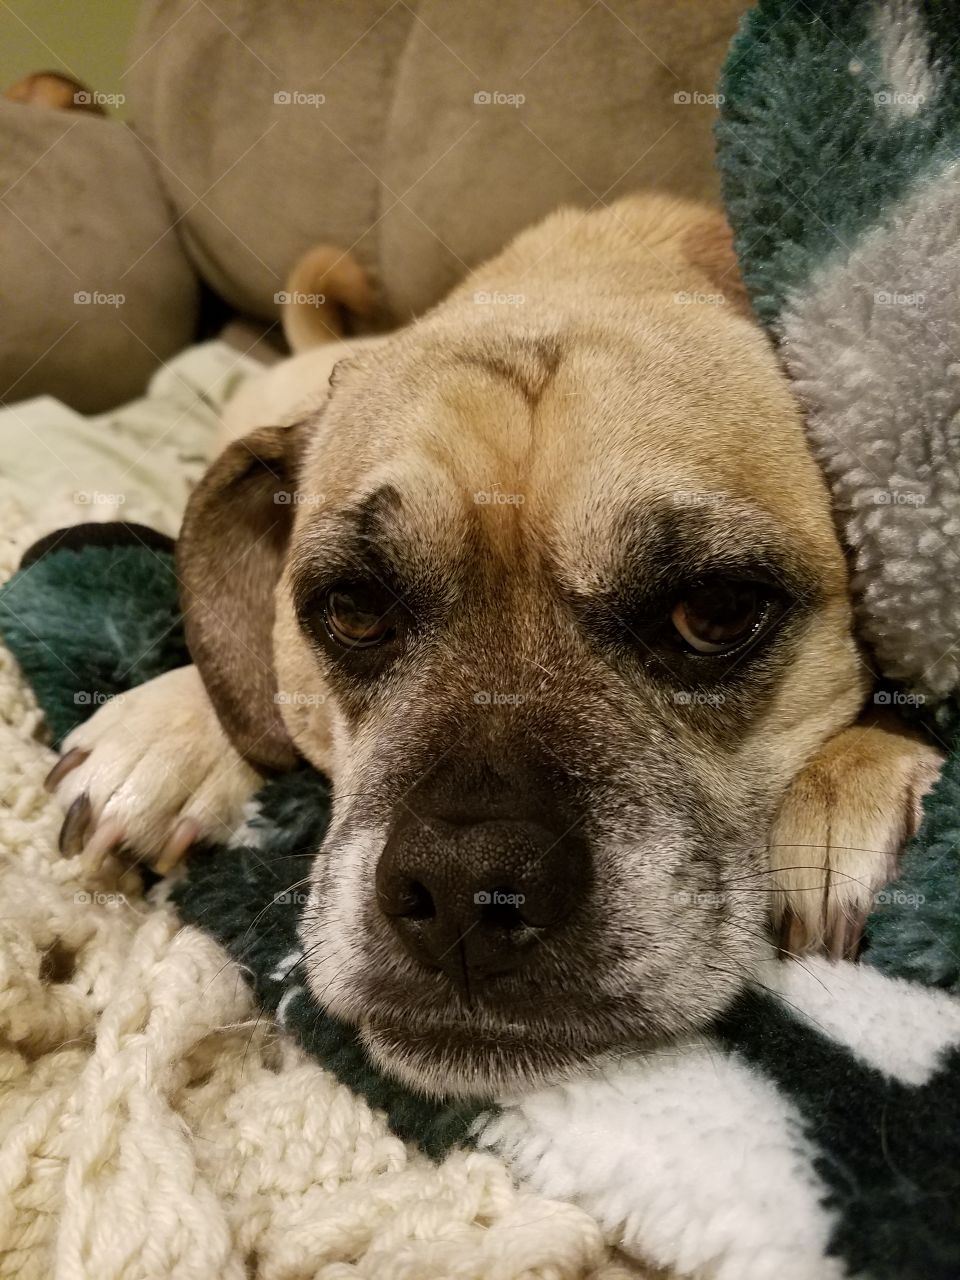 Puggle cuddling on the couch